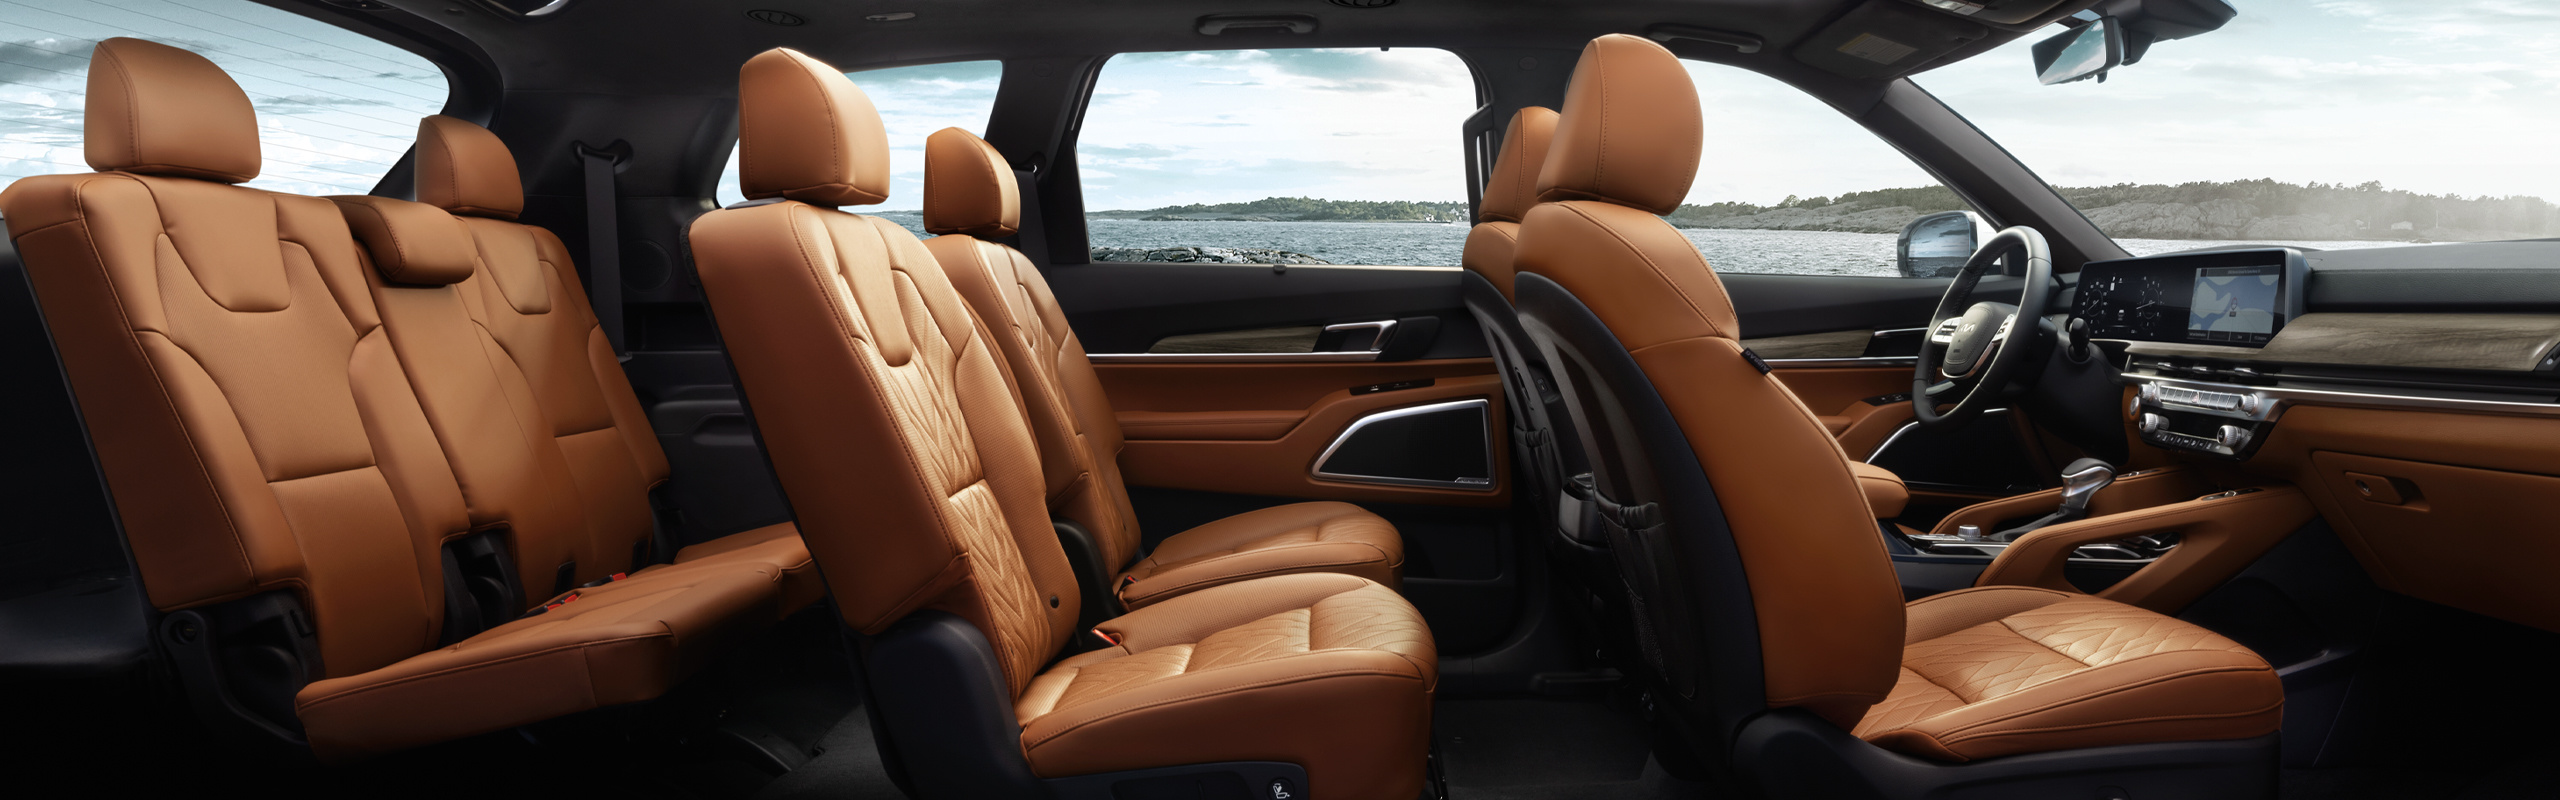 2023 Kia Telluride Spacious Interior With First And Second Row Heated And Ventilated Seats